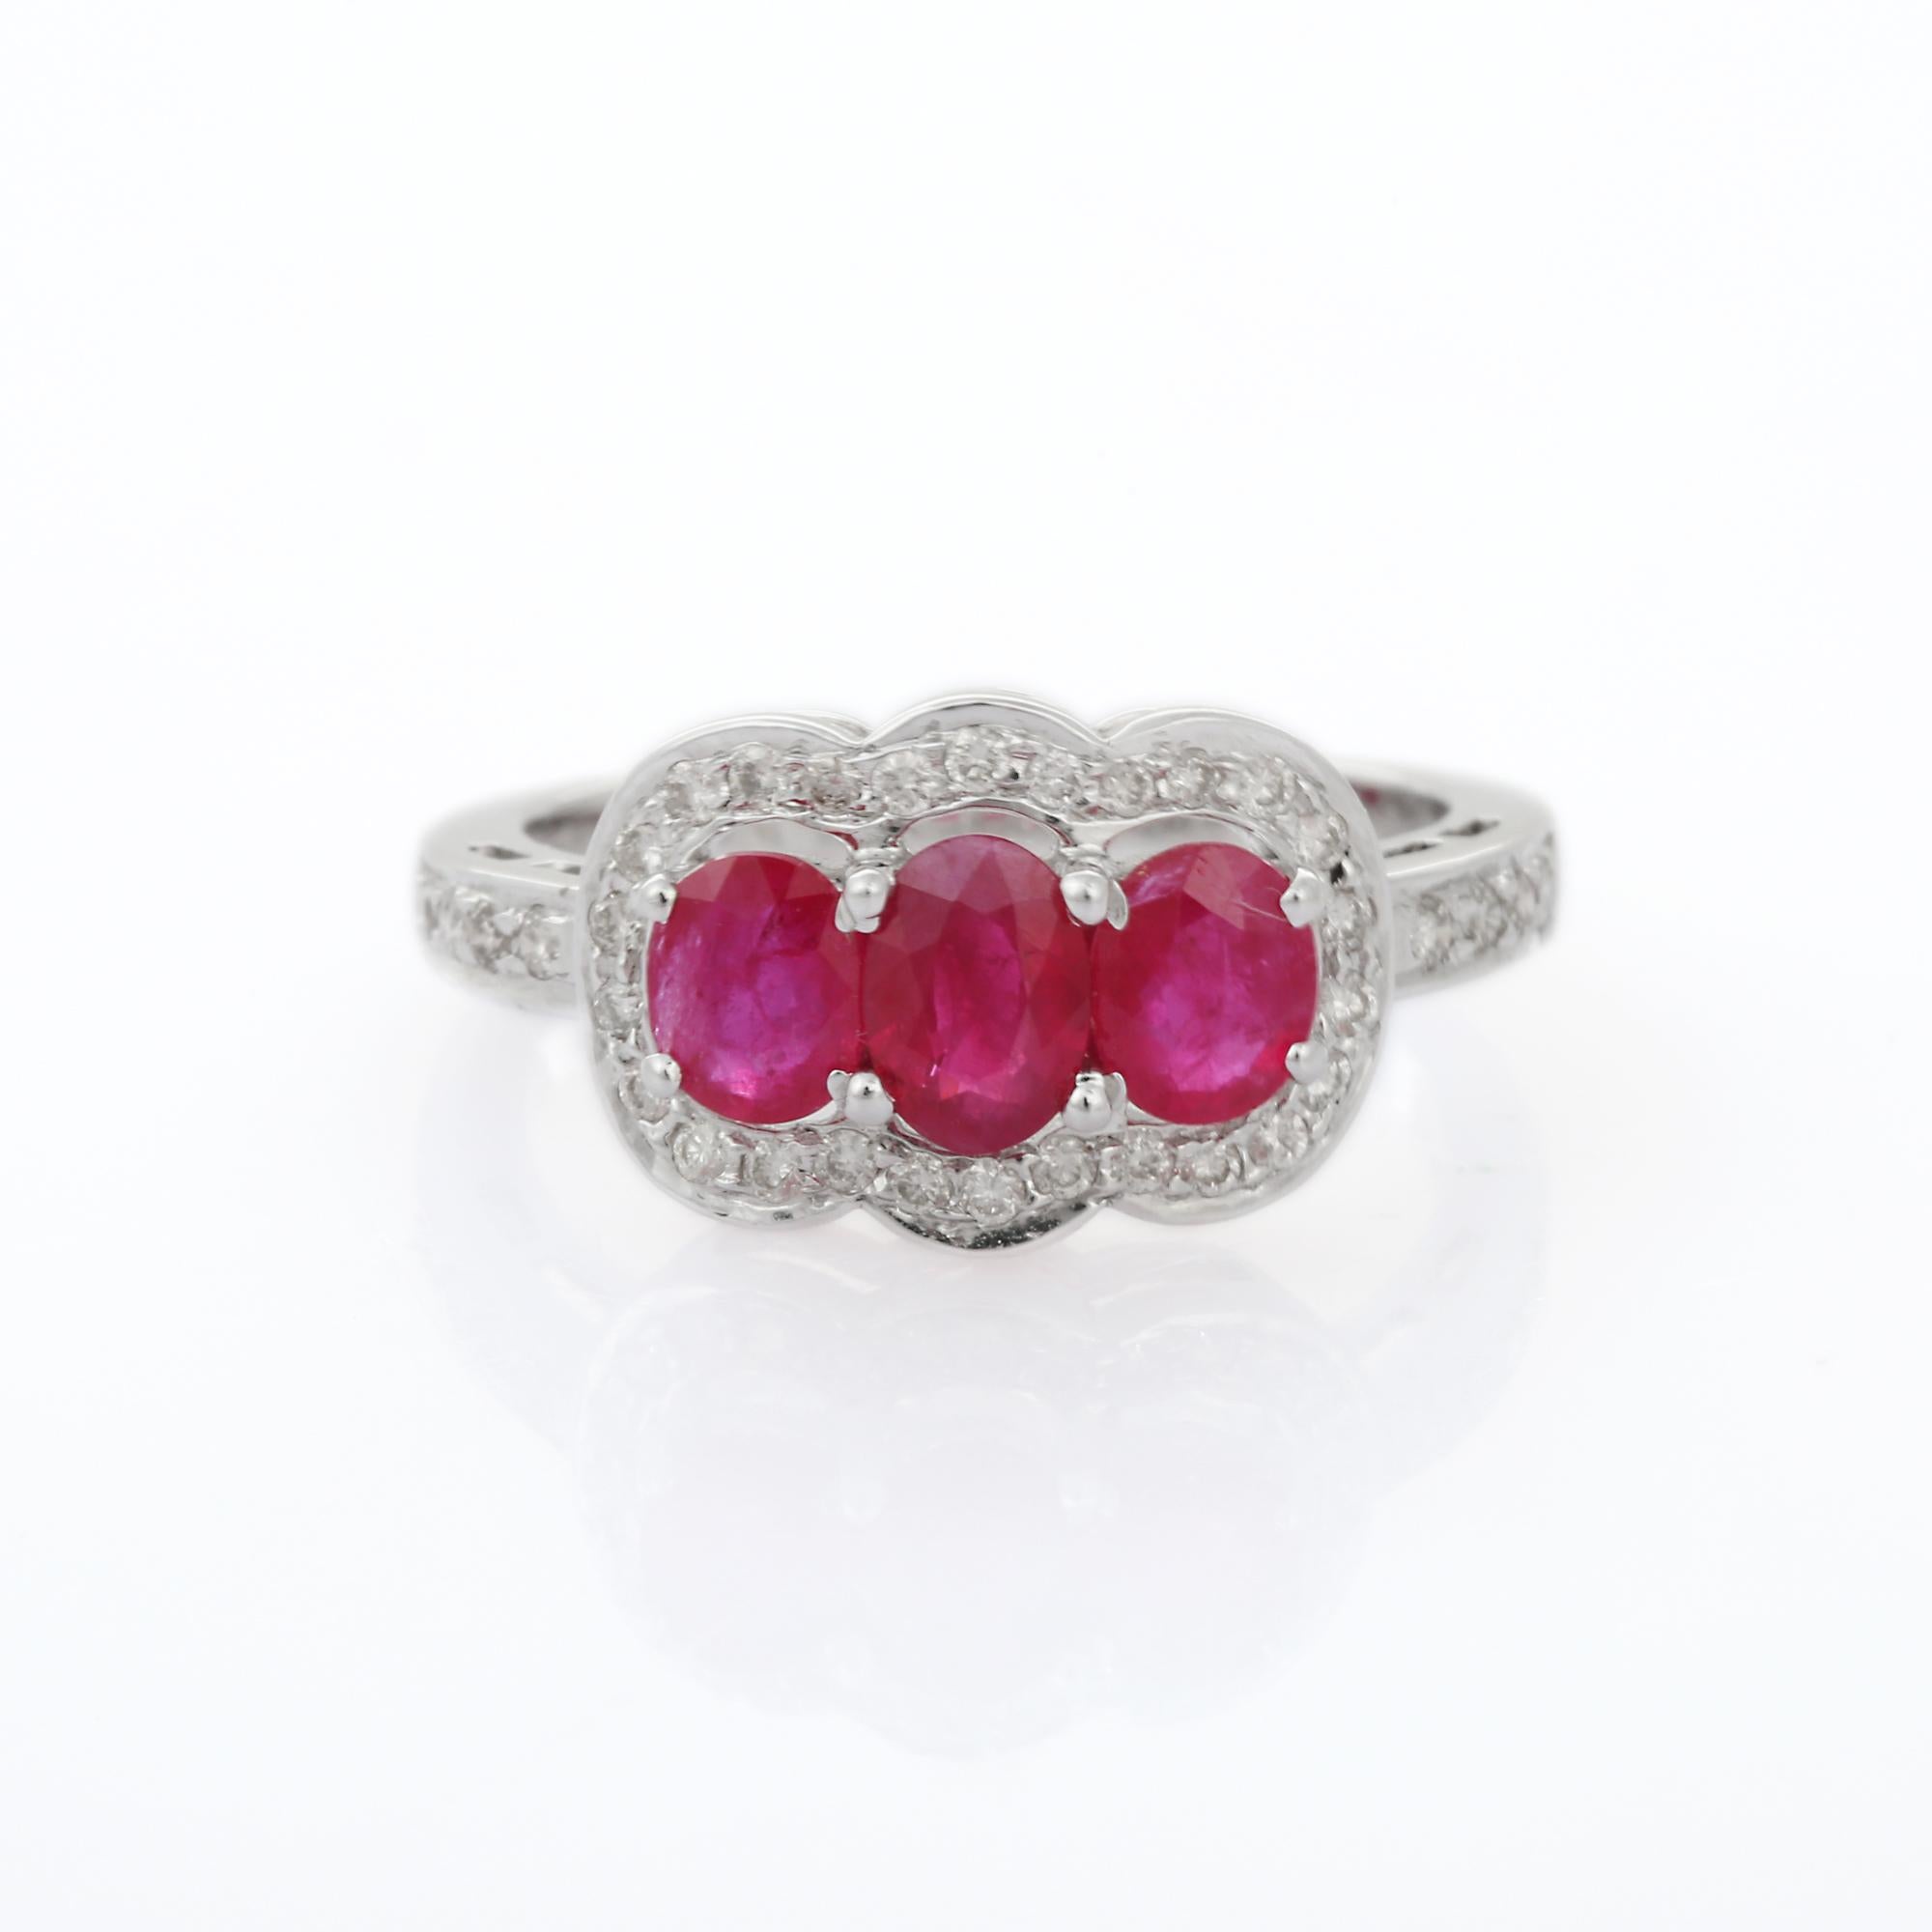 For Sale:  Oval Cut Three Stone Ruby Engagement Ring in 18K White Gold with Diamonds 17